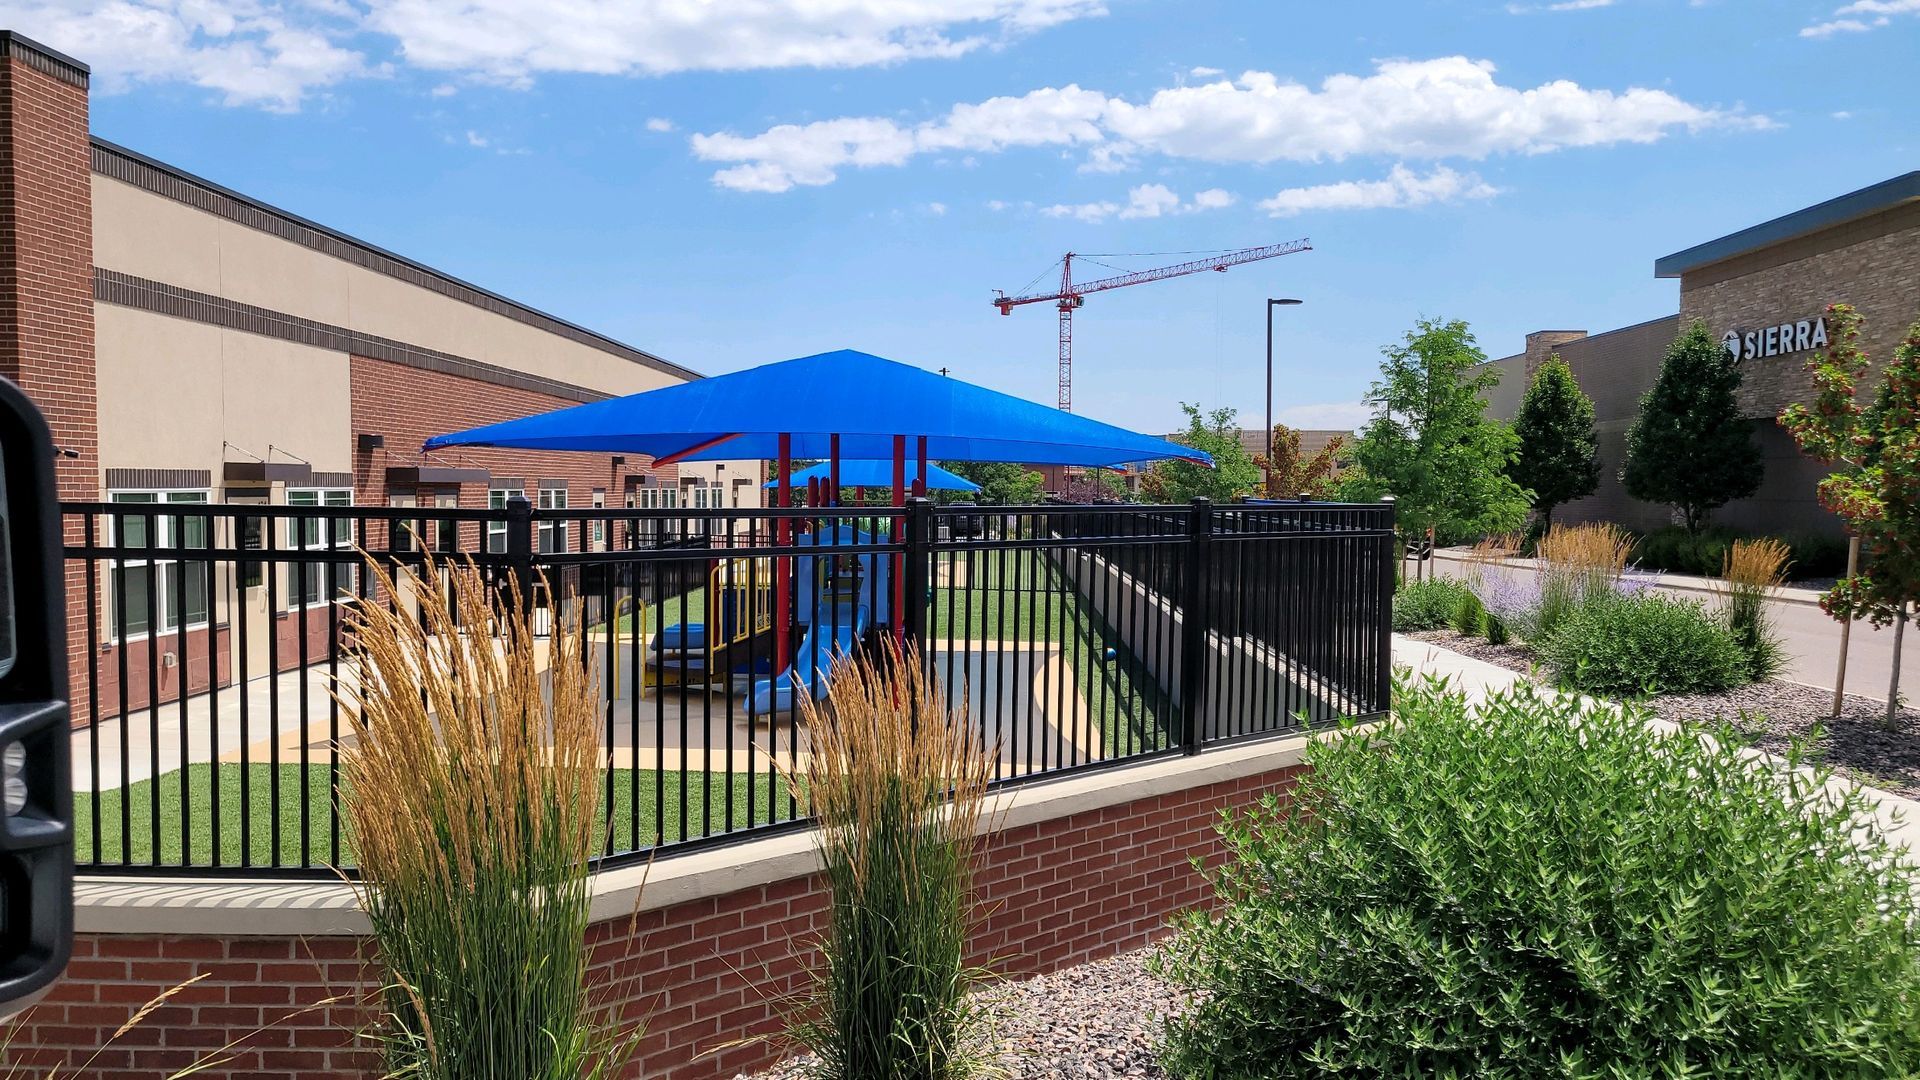 Commercial Ornamental Iron in Greeley, CO, with an ornamental iron fence.